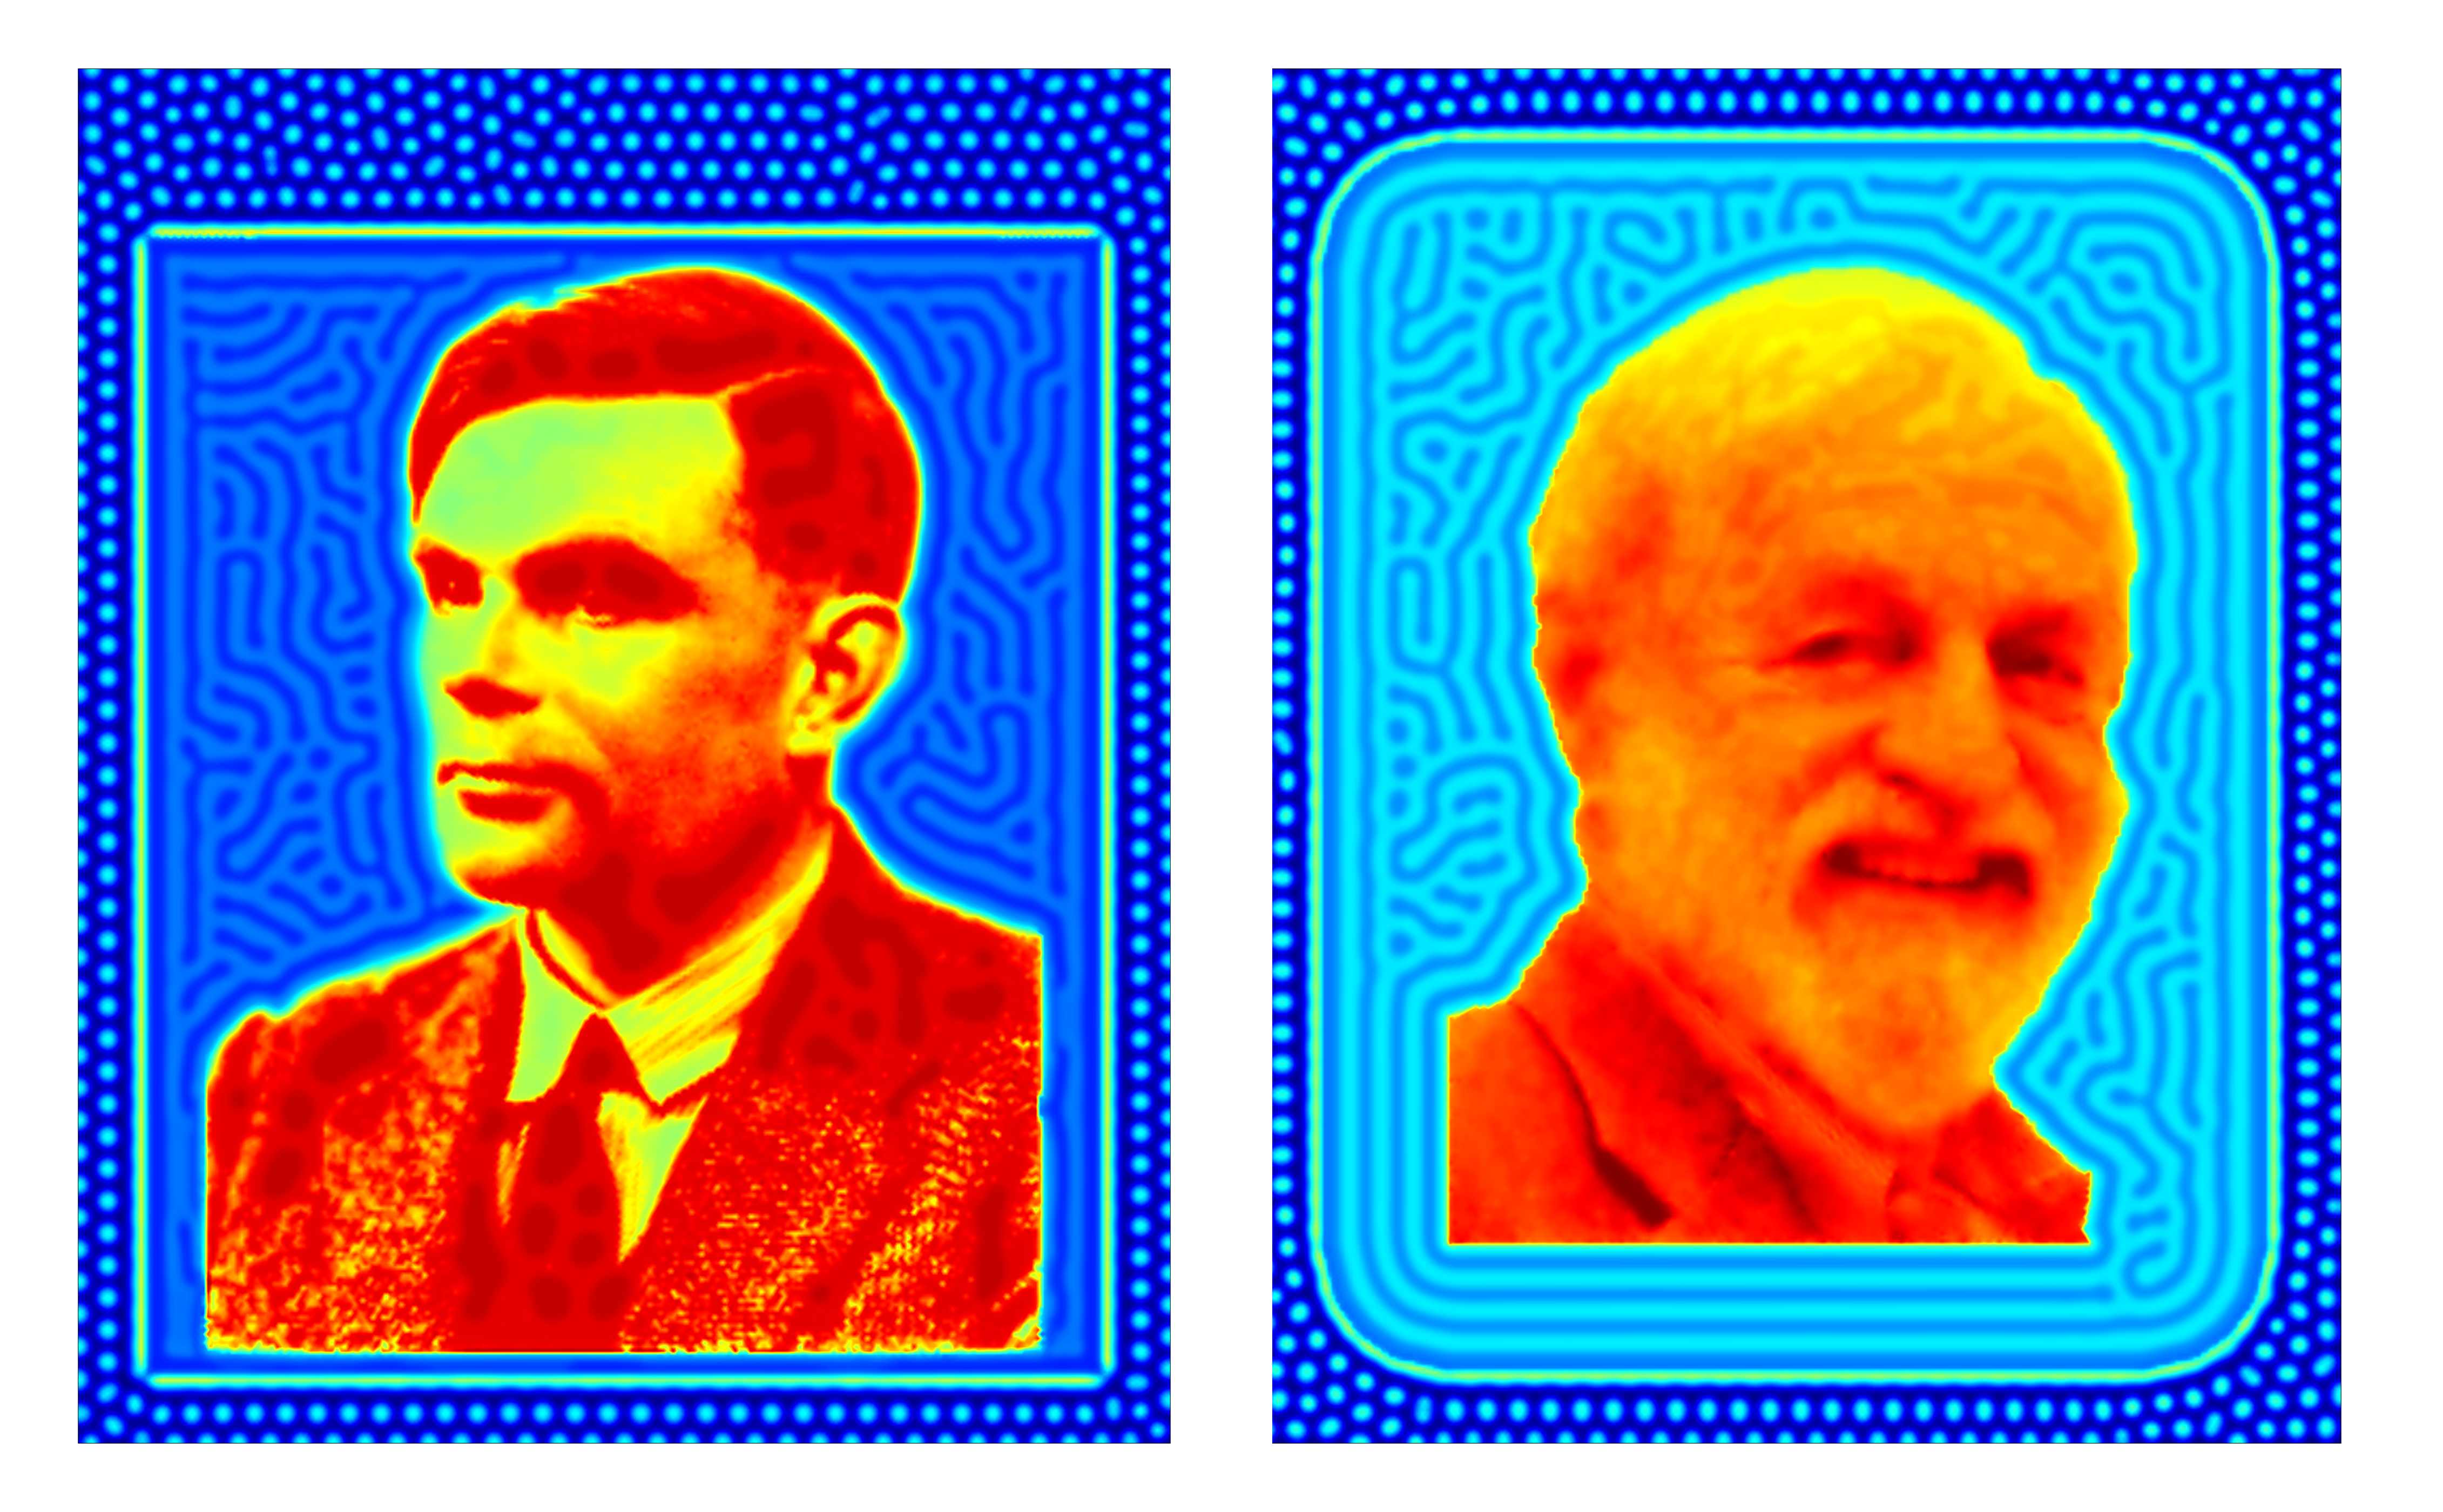 Faces of Alan Turing and James Murray created using Turing patterns